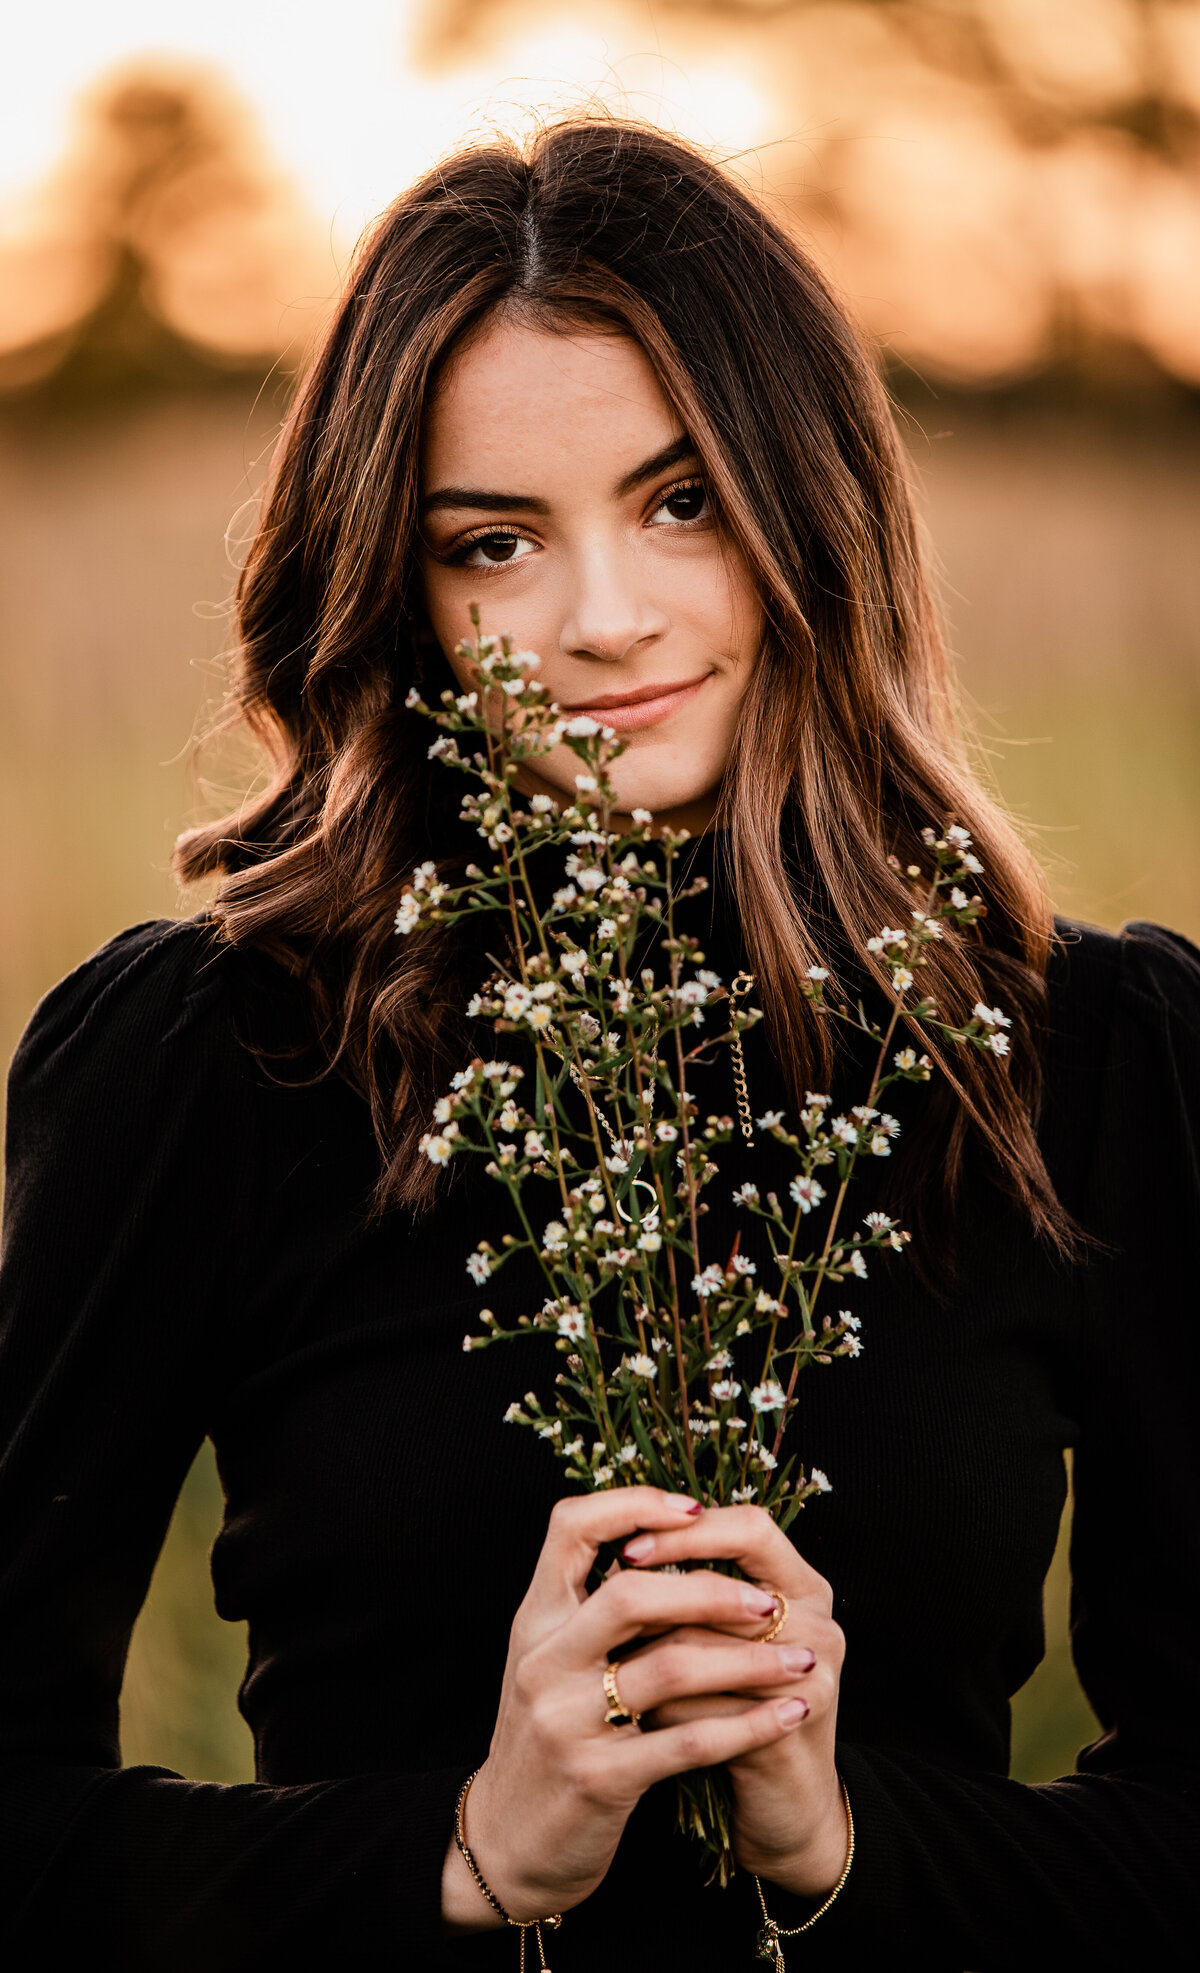 A high school senior wearing a black turtleneck holds wildflowers to her face while looking at the camera.